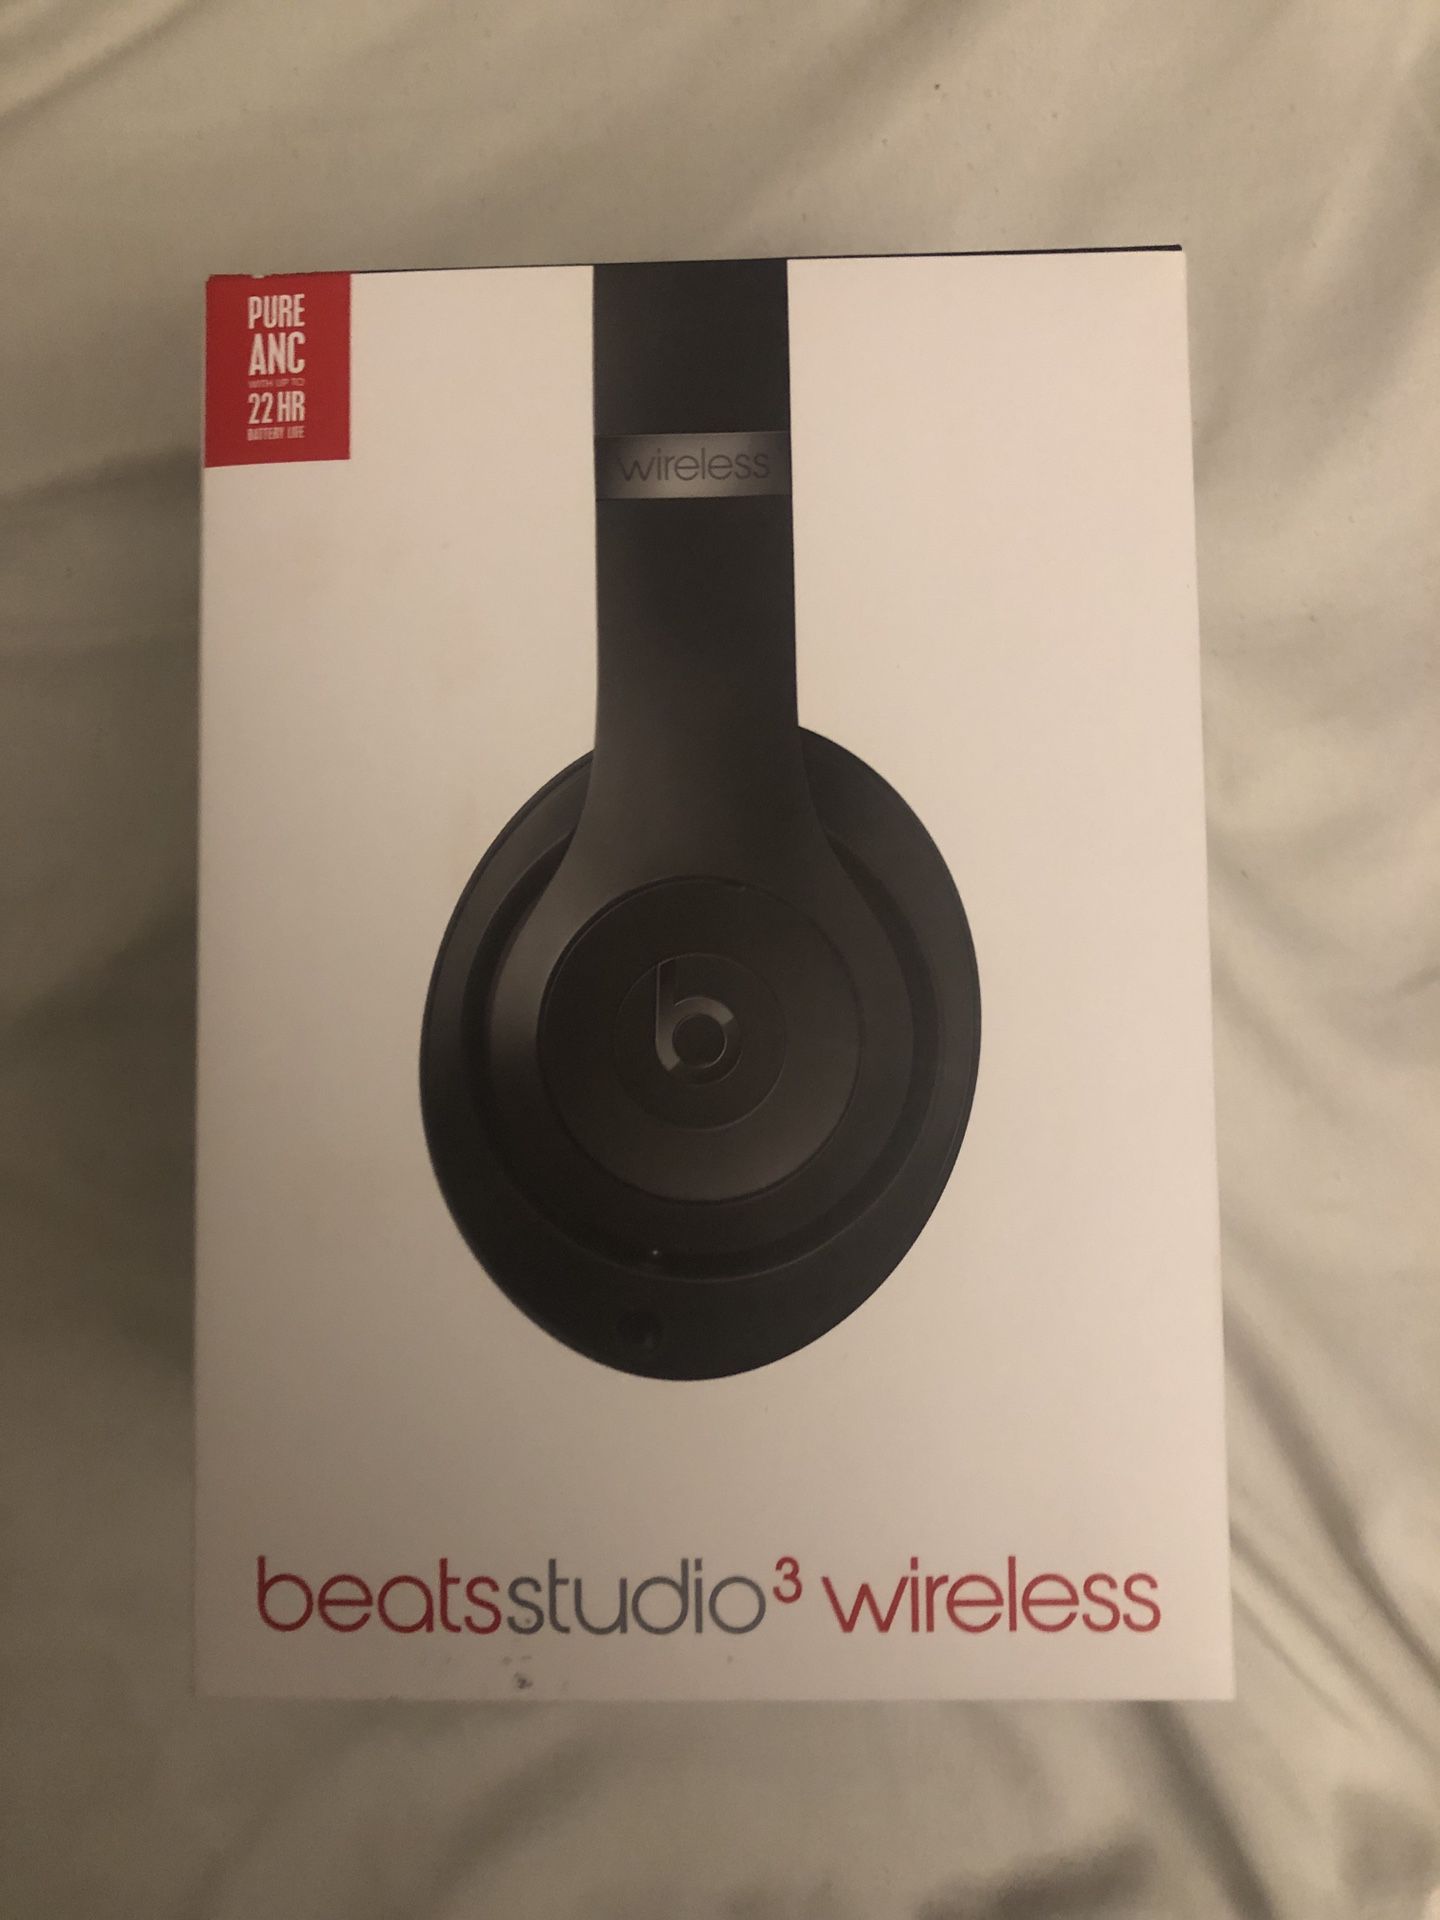 Beats Studio3 Wireless Noise Cancelling On-Ear Headphones - Apple W1 Headphone Chip, Class 1 Bluetooth, Active Noise Cancelling, 22 Hours Of Listeni